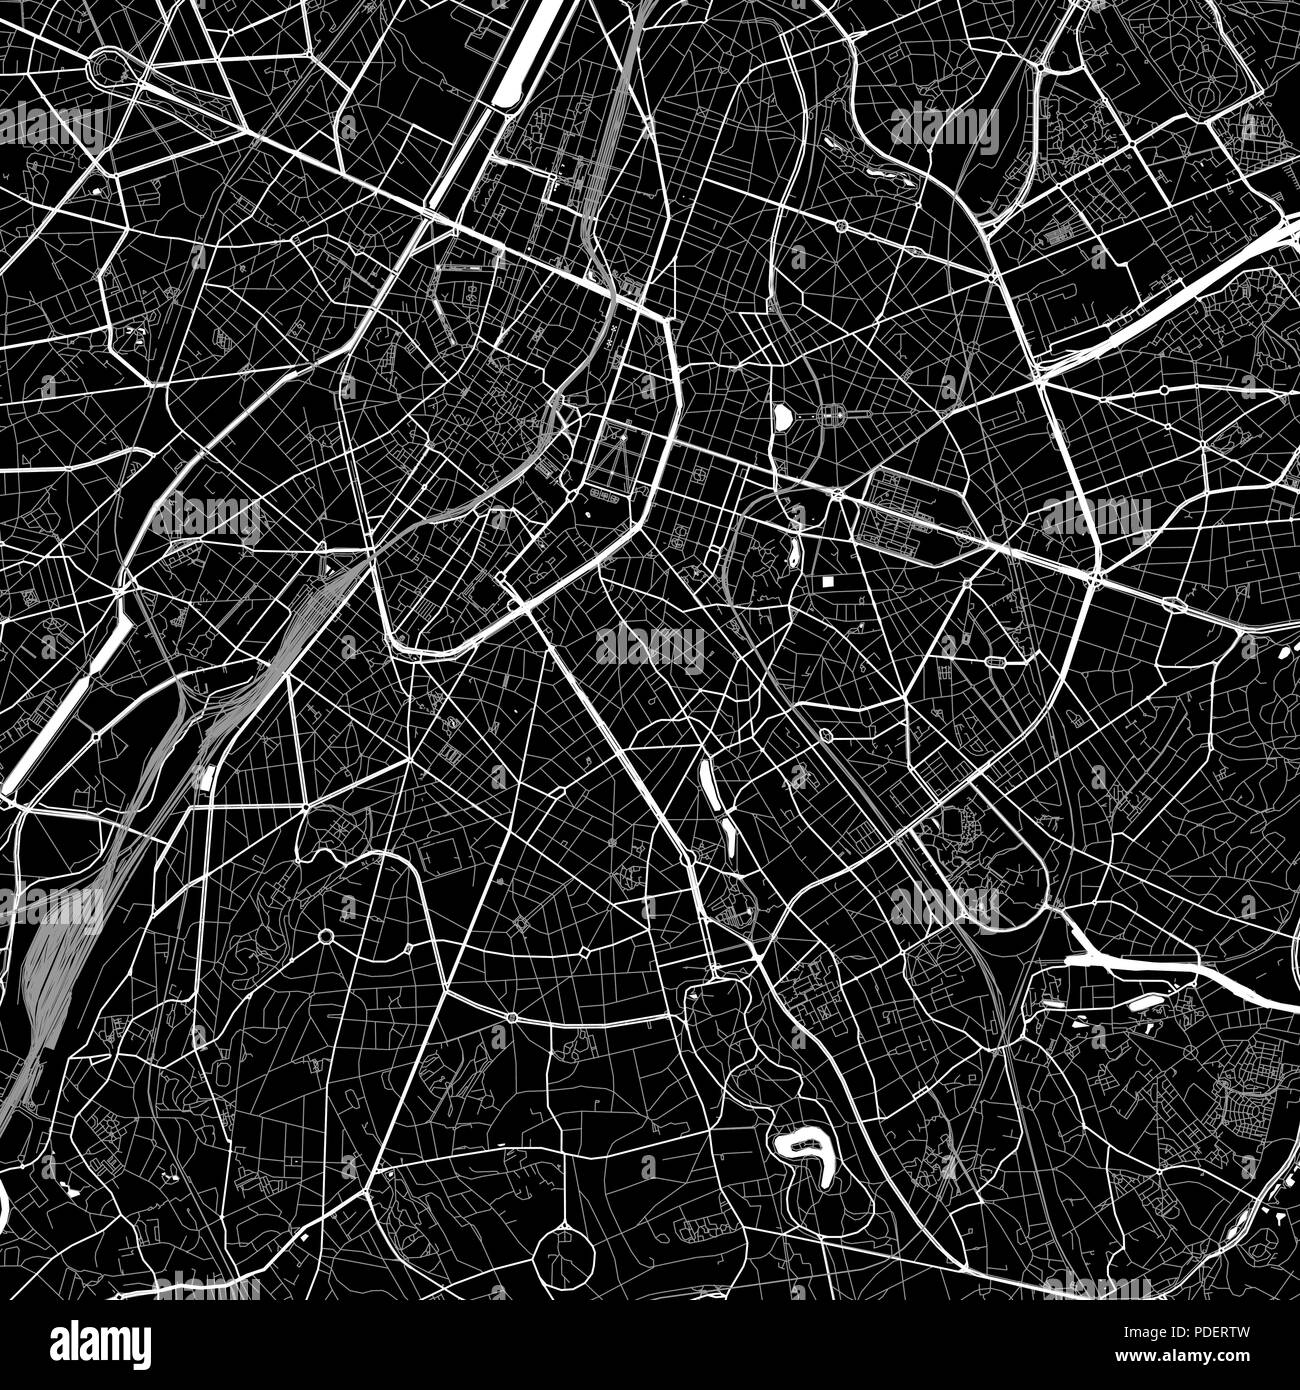 Area map of  Ixelles, Belgium. Dark background version for infographic and marketing. This map of  Ixelles, Brussels-Capital Region, contains streets, Stock Vector